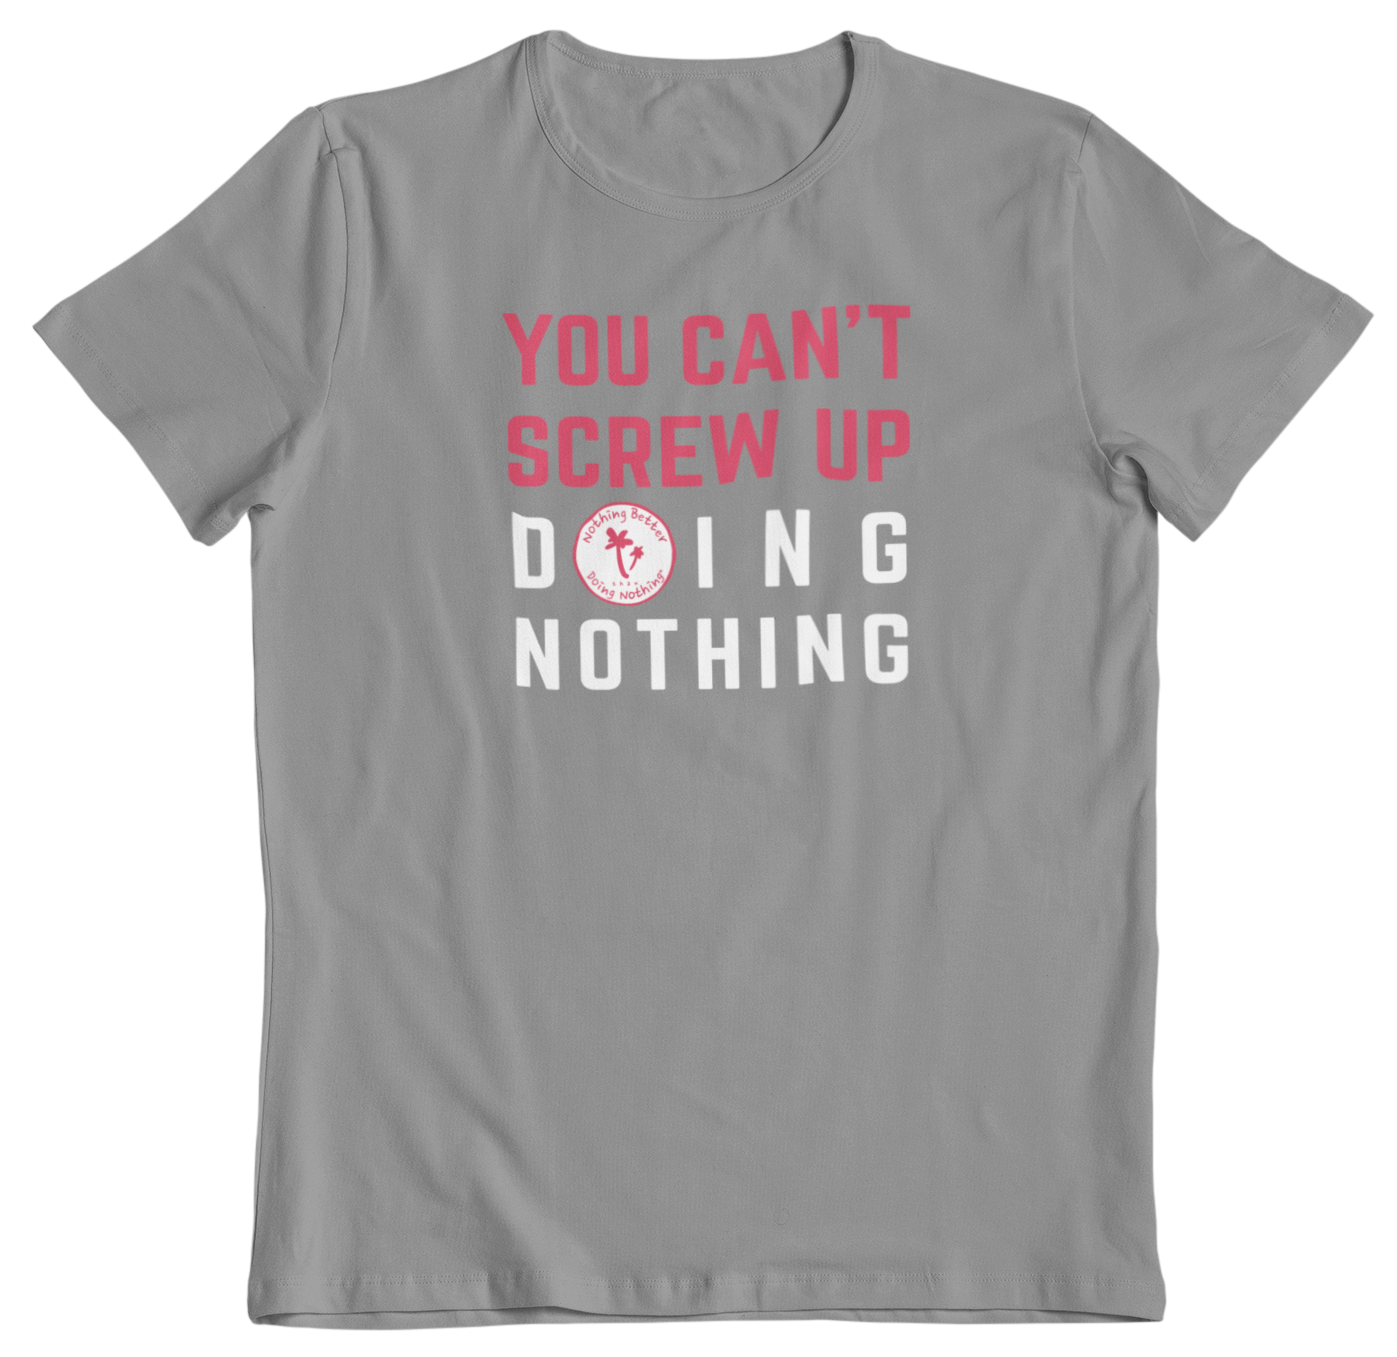 Can't Screw Up Doing Nothing Tee